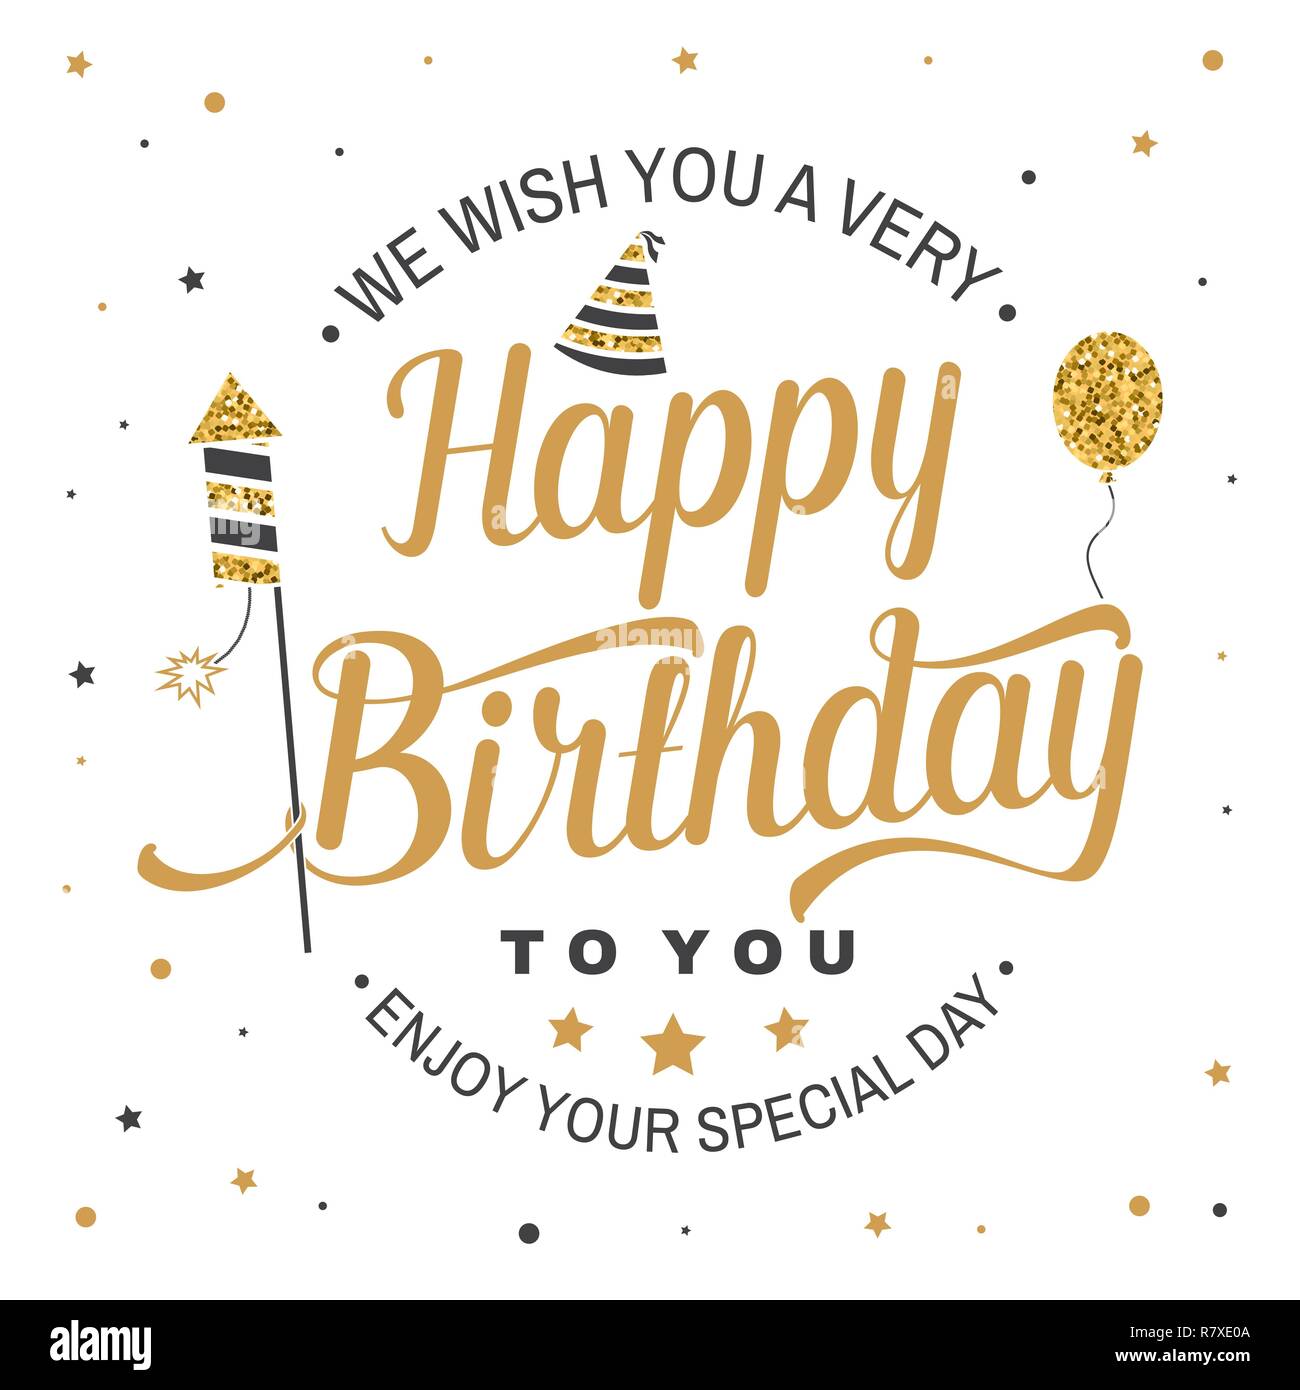 We wish you a very Happy Birthday. Stamp, badge, sticker, card with air ...